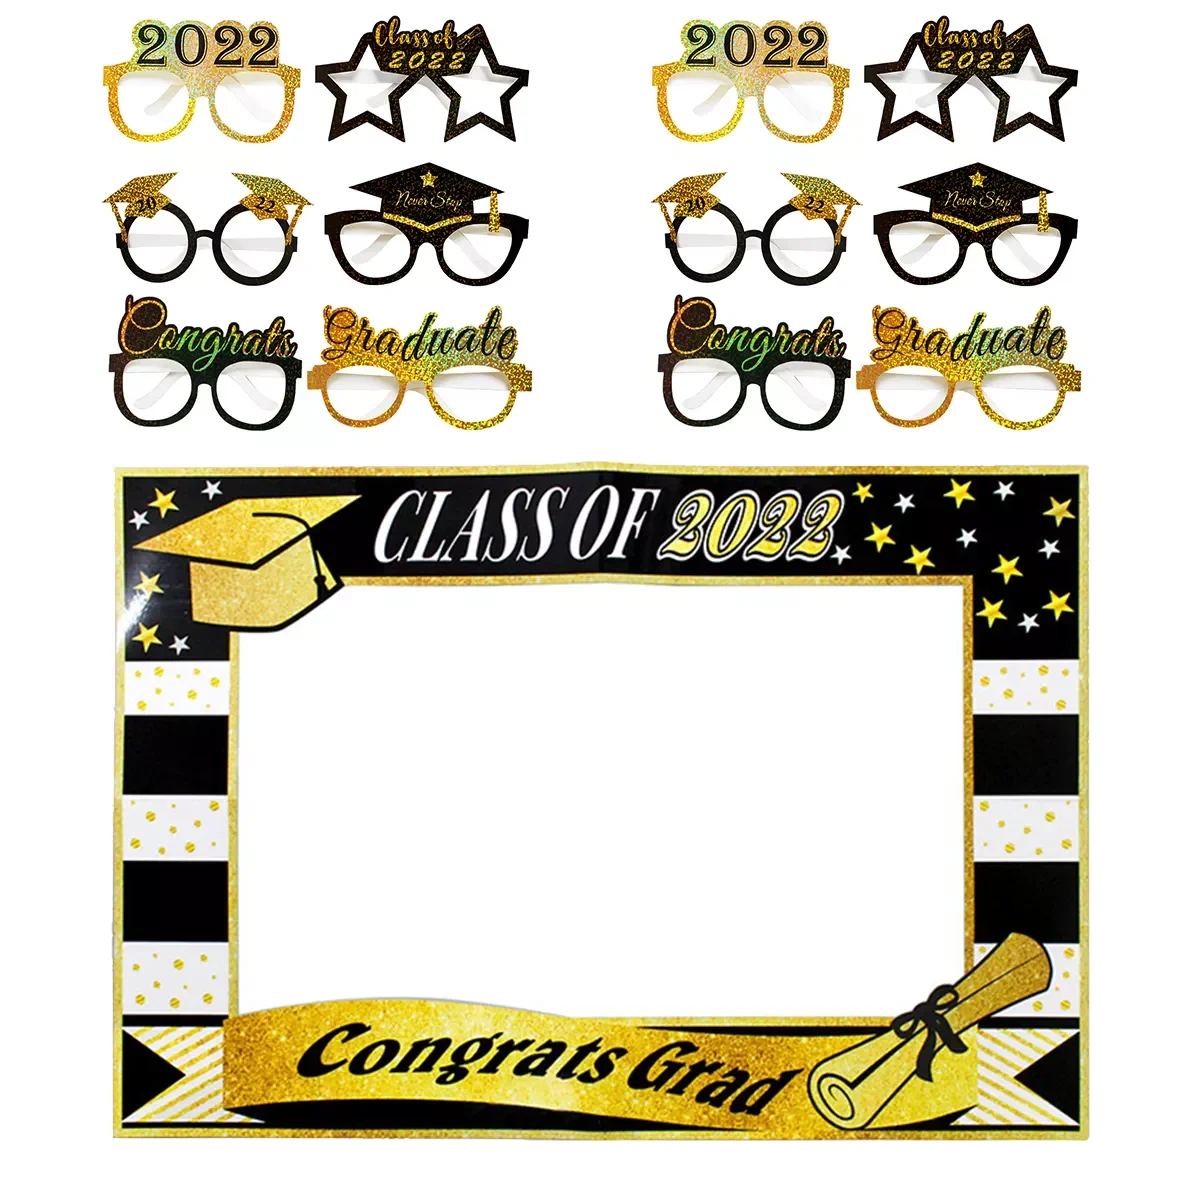 

Graduation Photo Booth Frame Glasses Props Party Decorations Class of 2022 Bachelor Cap Grad Graduated Supplies PhotoBooth Gift